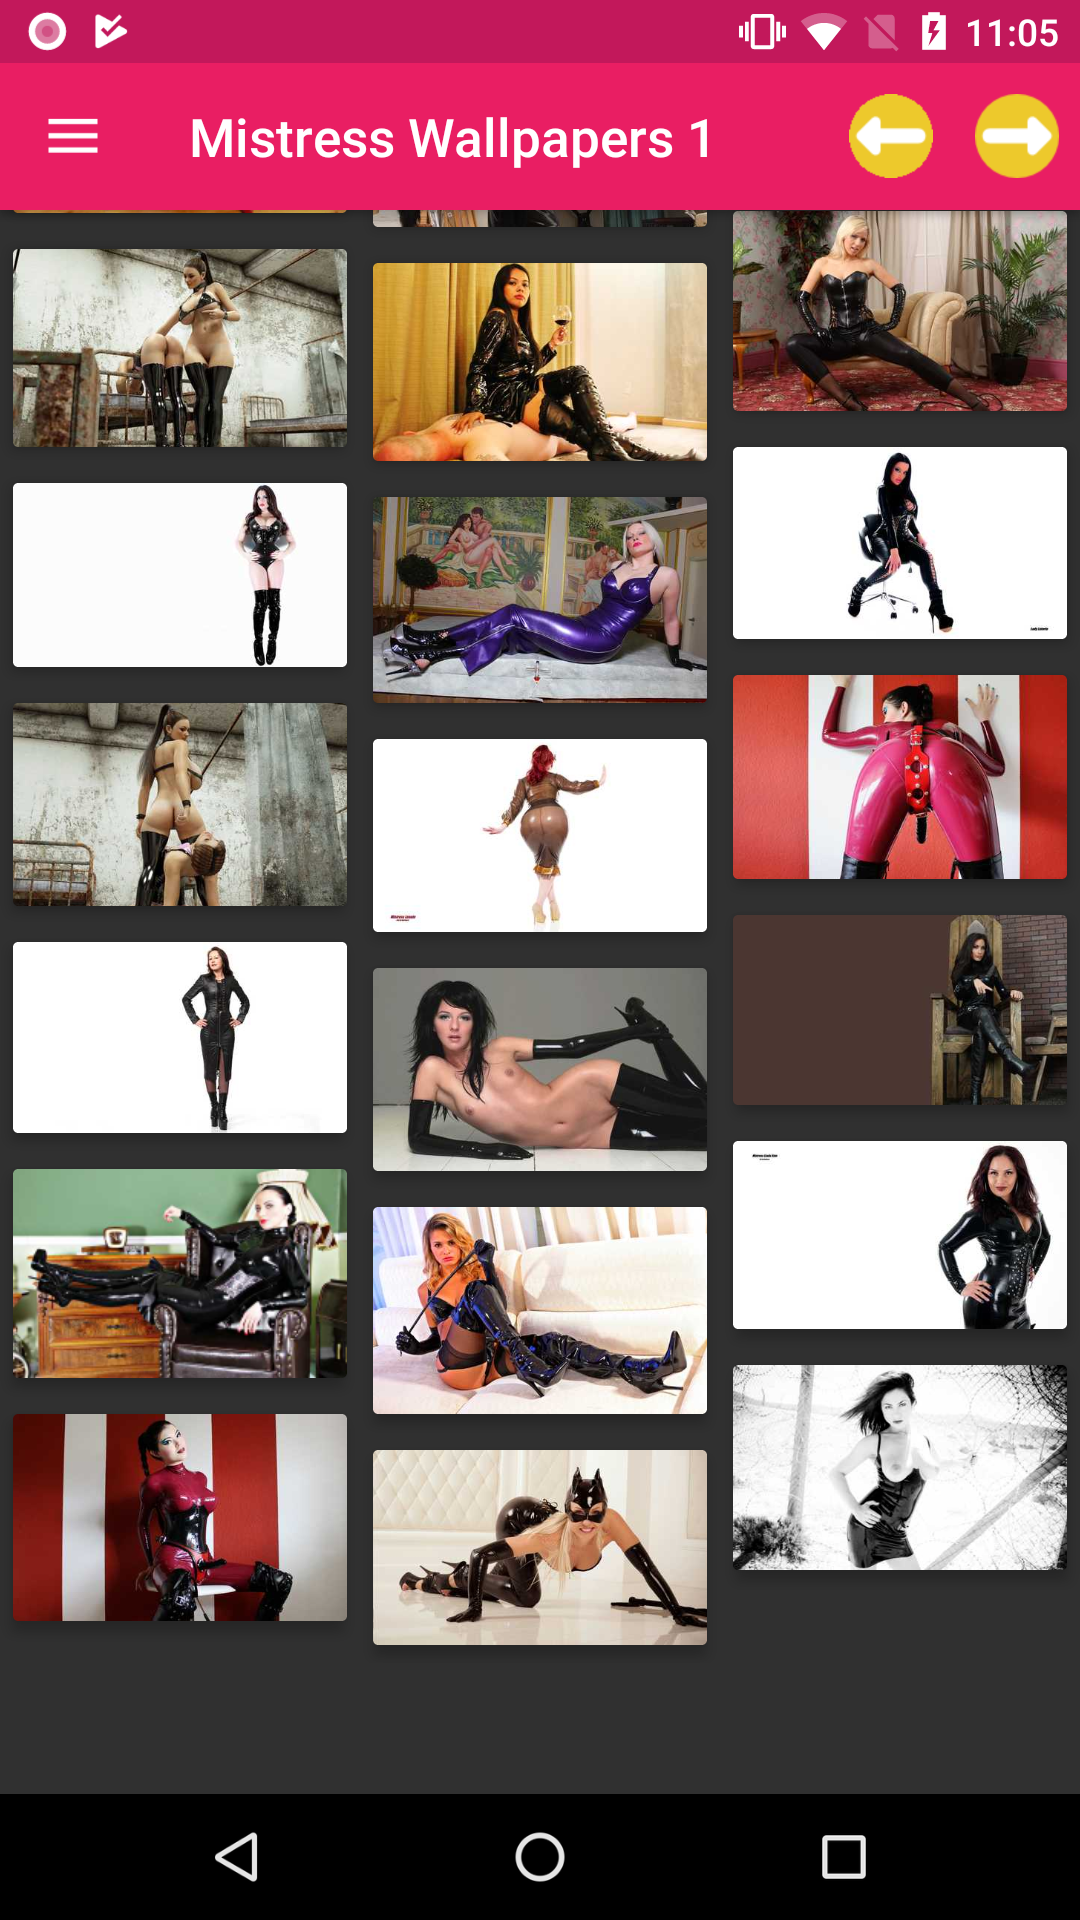 Mistress Wallpapers latex,apps,editor,photo,adult,wallpapers,app,apk,mistress,watching,bdsm,for,free,porn,android,pictures,hentai,picture,hentia,hot,femdom,domination,gallery,sex,mature